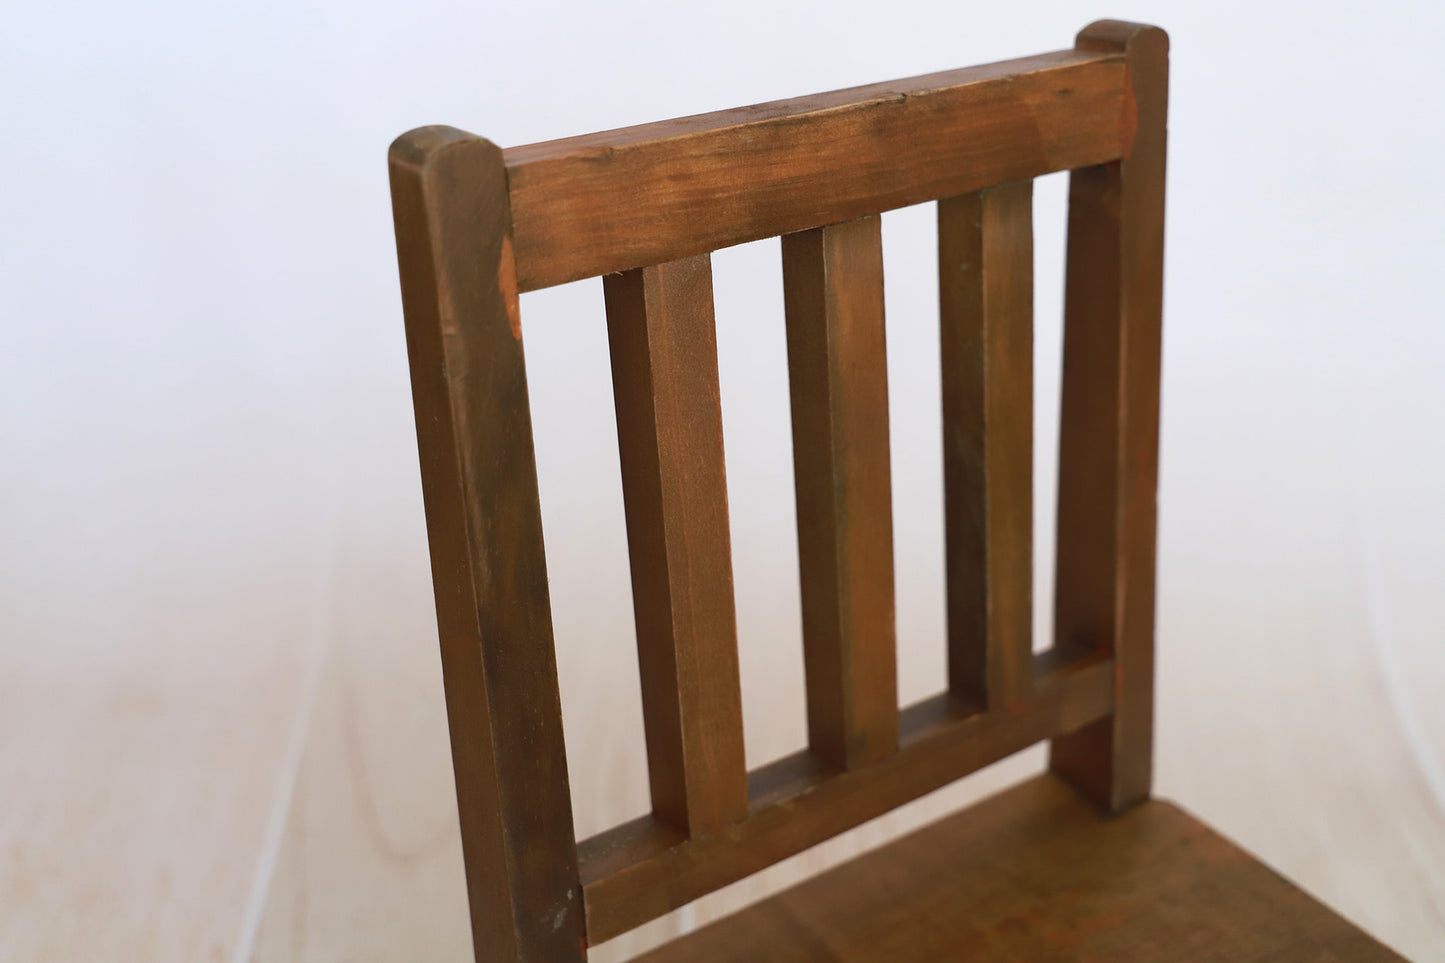 Small Wooden Harlow Chair